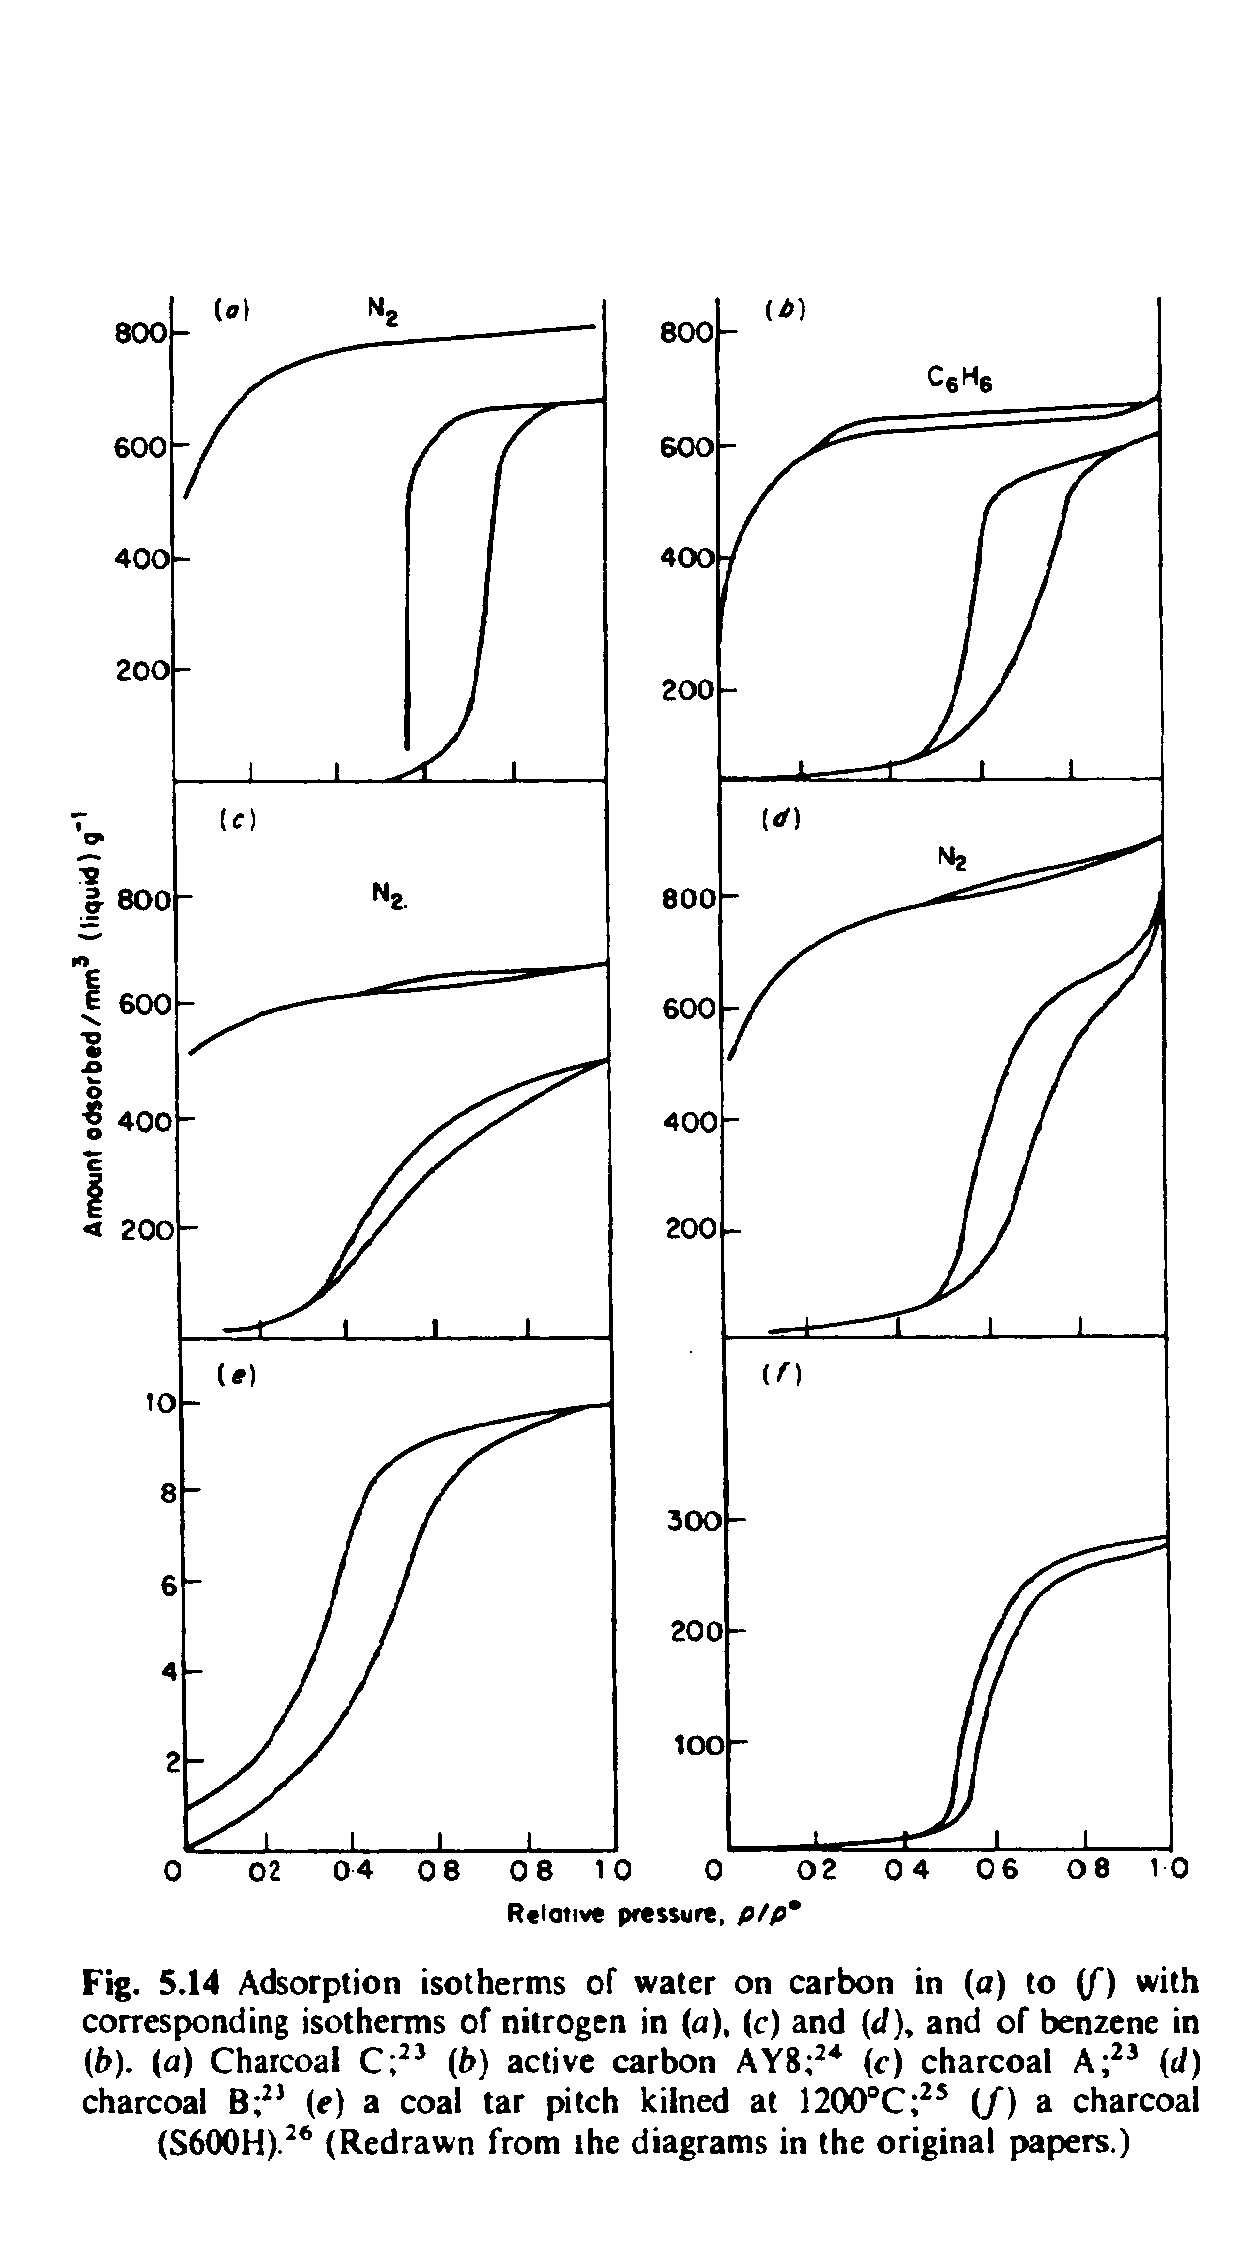 Fig. 5.14 Adsorption isotherms of water on carbon in (a) to f) with corresponding isotherms of nitrogen in (a), (c) and (J), and of benzene in (f>). (a) Charcoal (b) active carbon AY8 (c) charcoal A (J) charcoal (e) a coal tar pitch kilned at 1200°C (/) a charcoal (S600H). (Redrawn from the diagrams in the original papers.)...